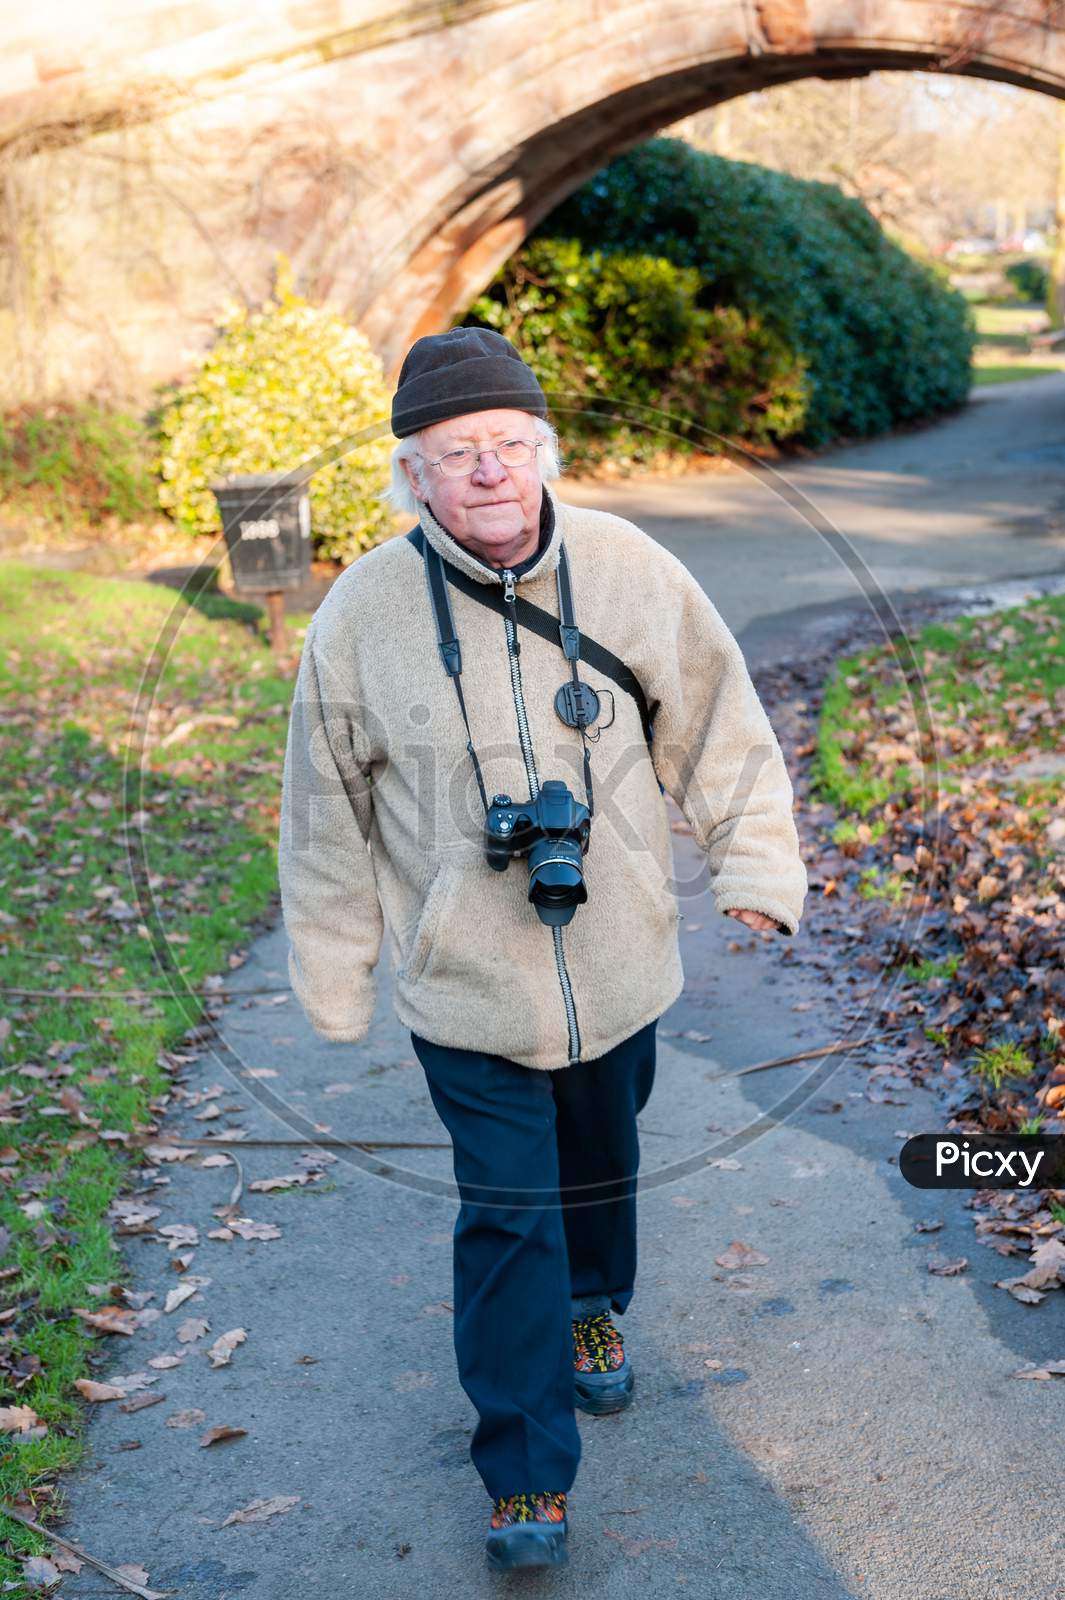 An Elderly Man With A Camera Around His Neck Walks Along A Country Path